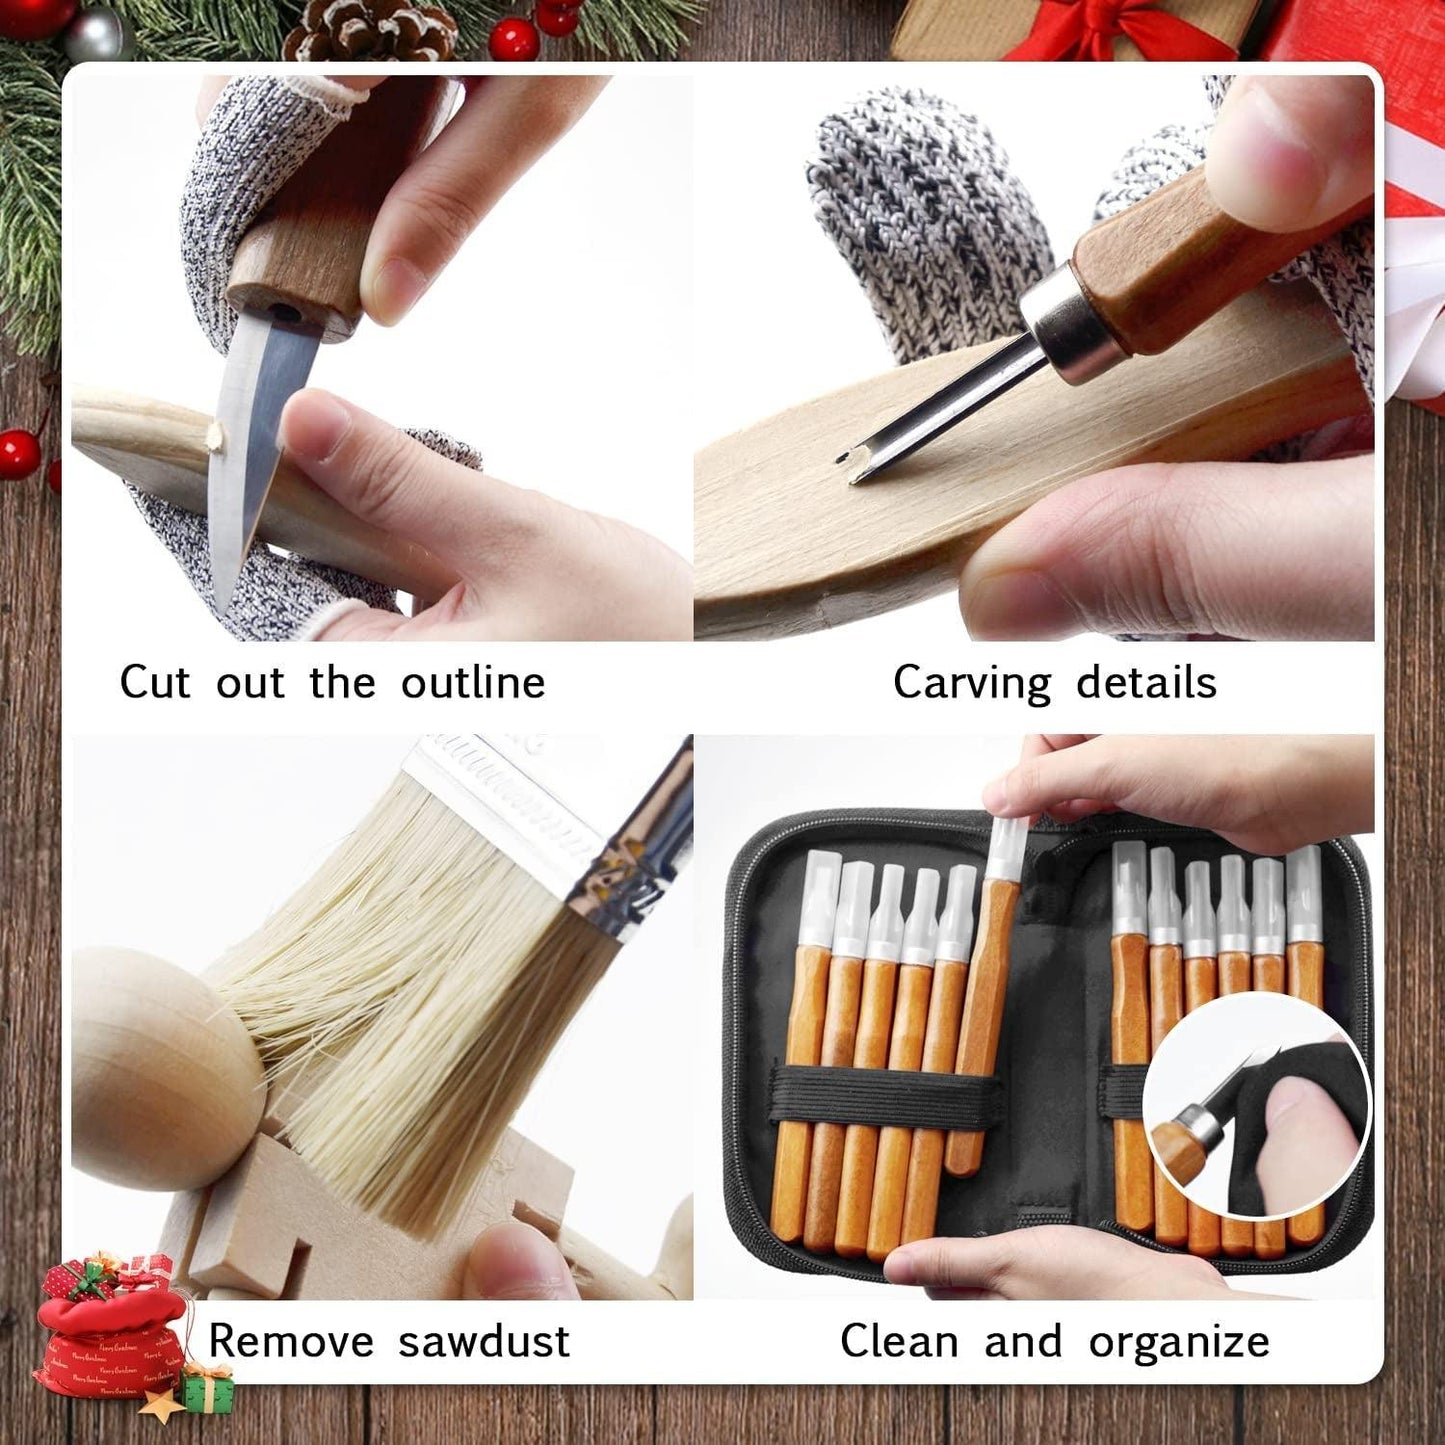 Wood Carving Tools Kit for Beginners 23Pcs Hand Carving Knife Set Craft Engraving Supplies - WoodArtSupply